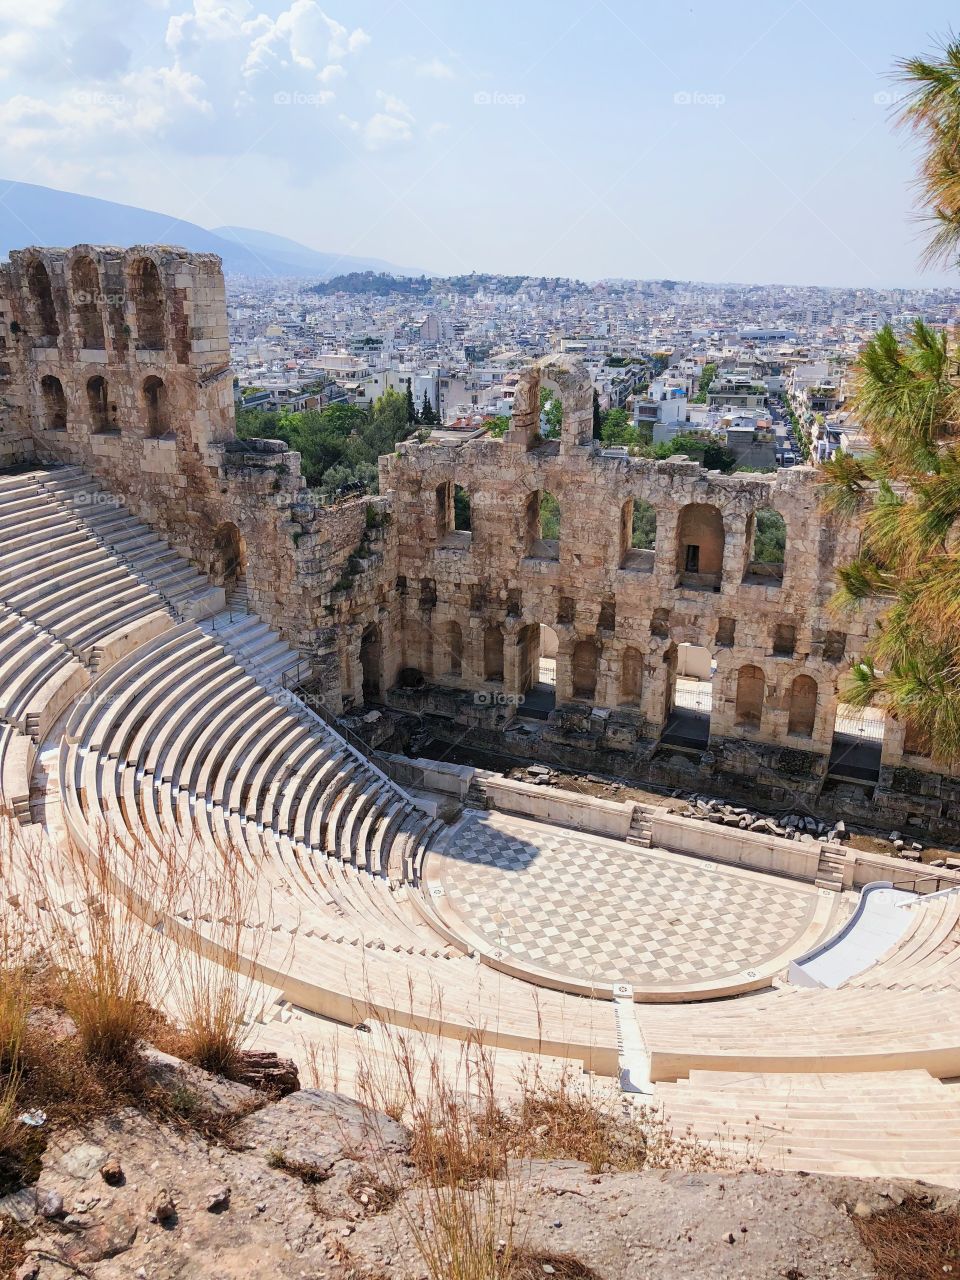 Many shows were played on these stones, today the beauty of the Greek theatre is more powerful than ever. The architecture is genius too: if you stand in the middle of the “stage” people can hear you whisper from far far away. 🎭